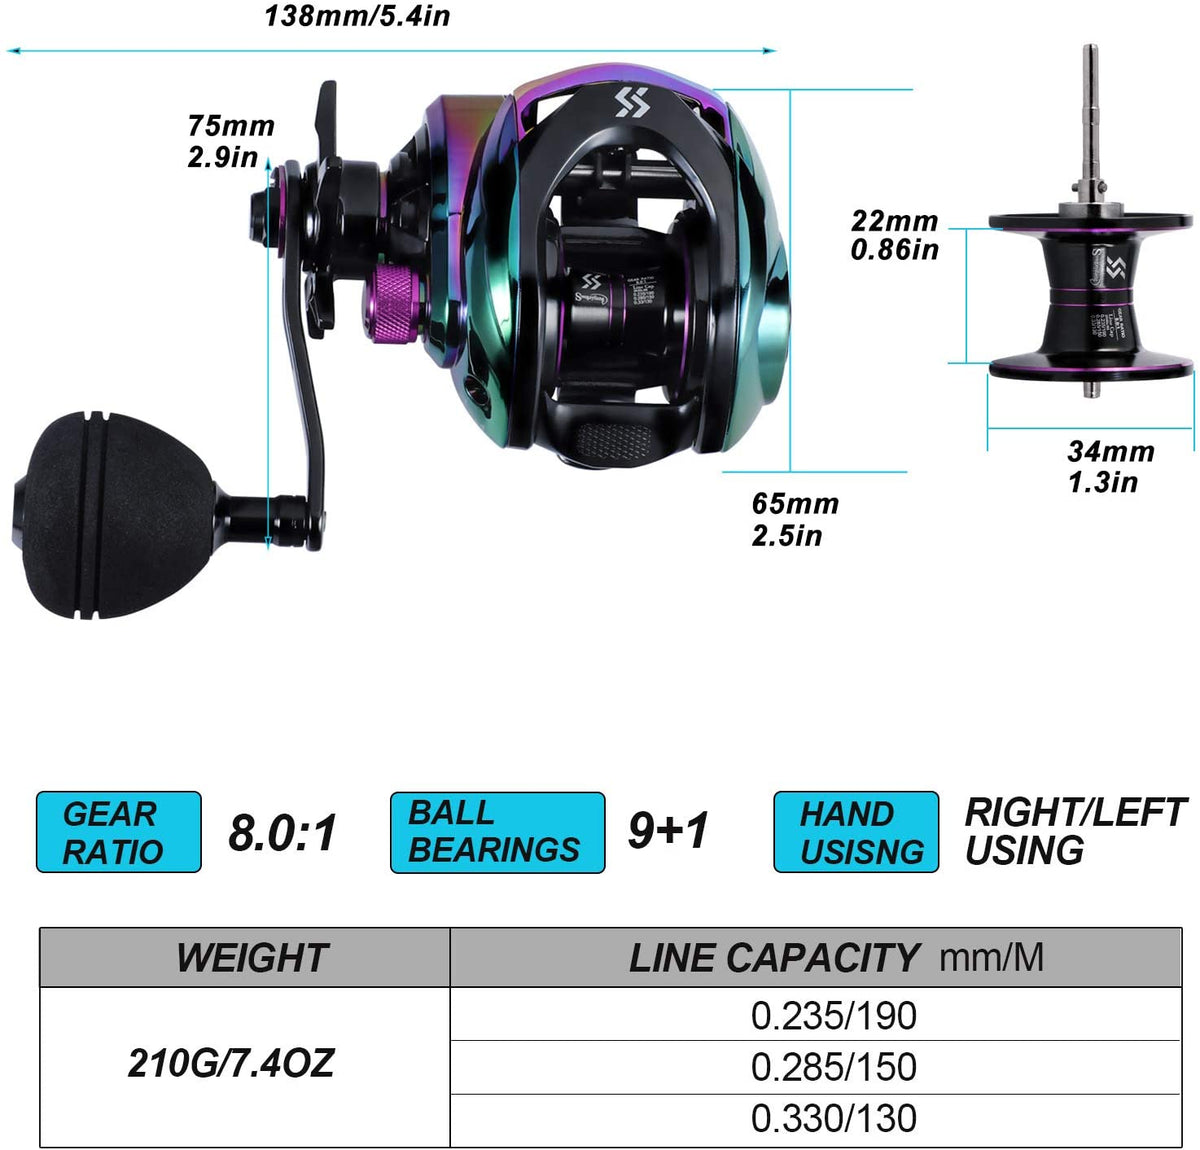  FISHDROPS Baitcaster Reels, 9+1BB, CNC Aluminum Spool,  Magnetic Brake System Bait Caster Reel High Speed Gear Ratio 7.0:1 Ultra  Smooth Low Profile Baitcasting Fishing Reel : Sports & Outdoors